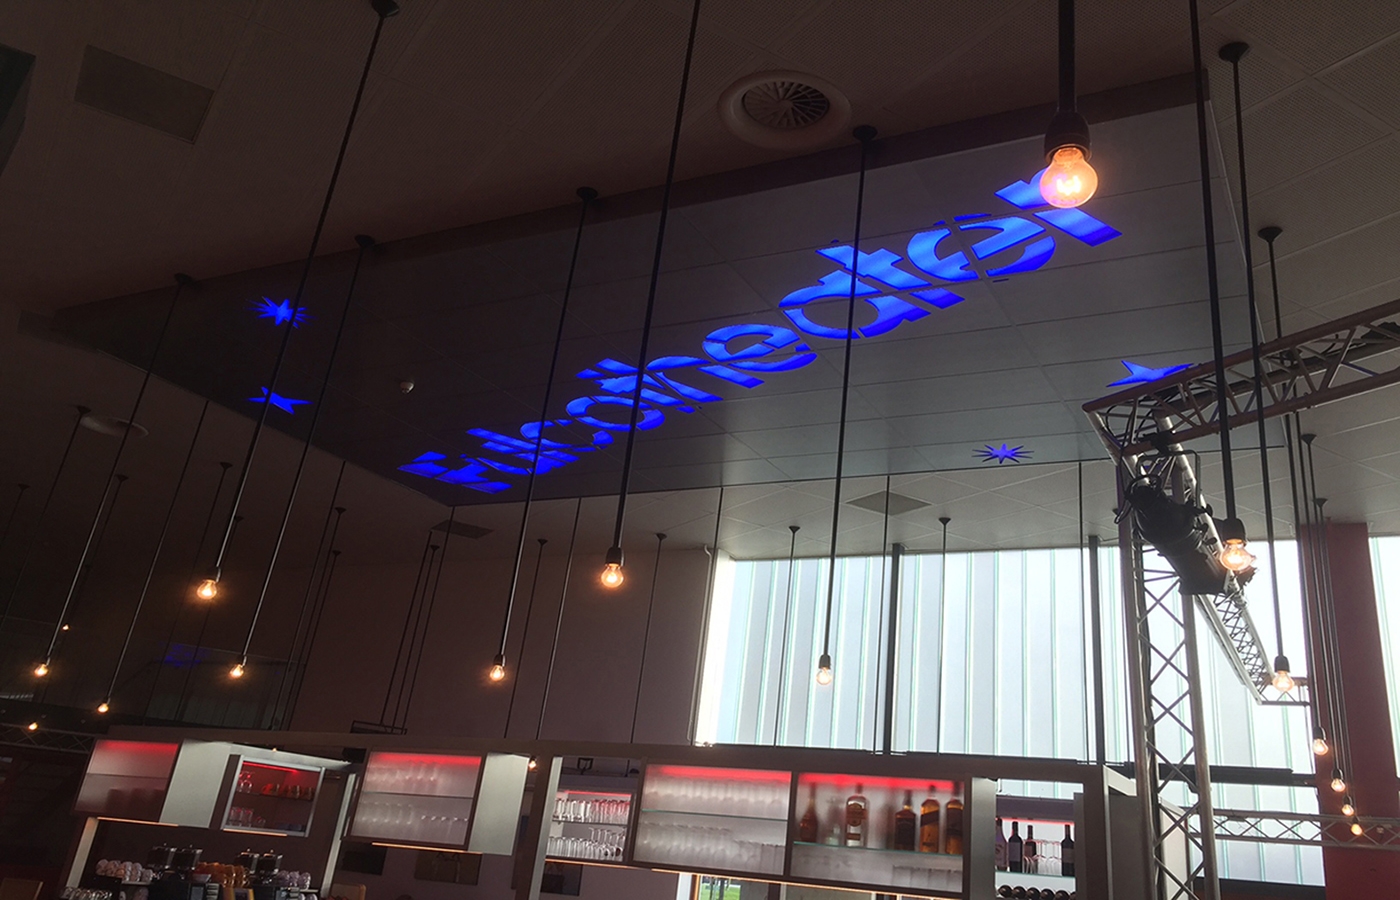 LEDSign project: Fulcotheater